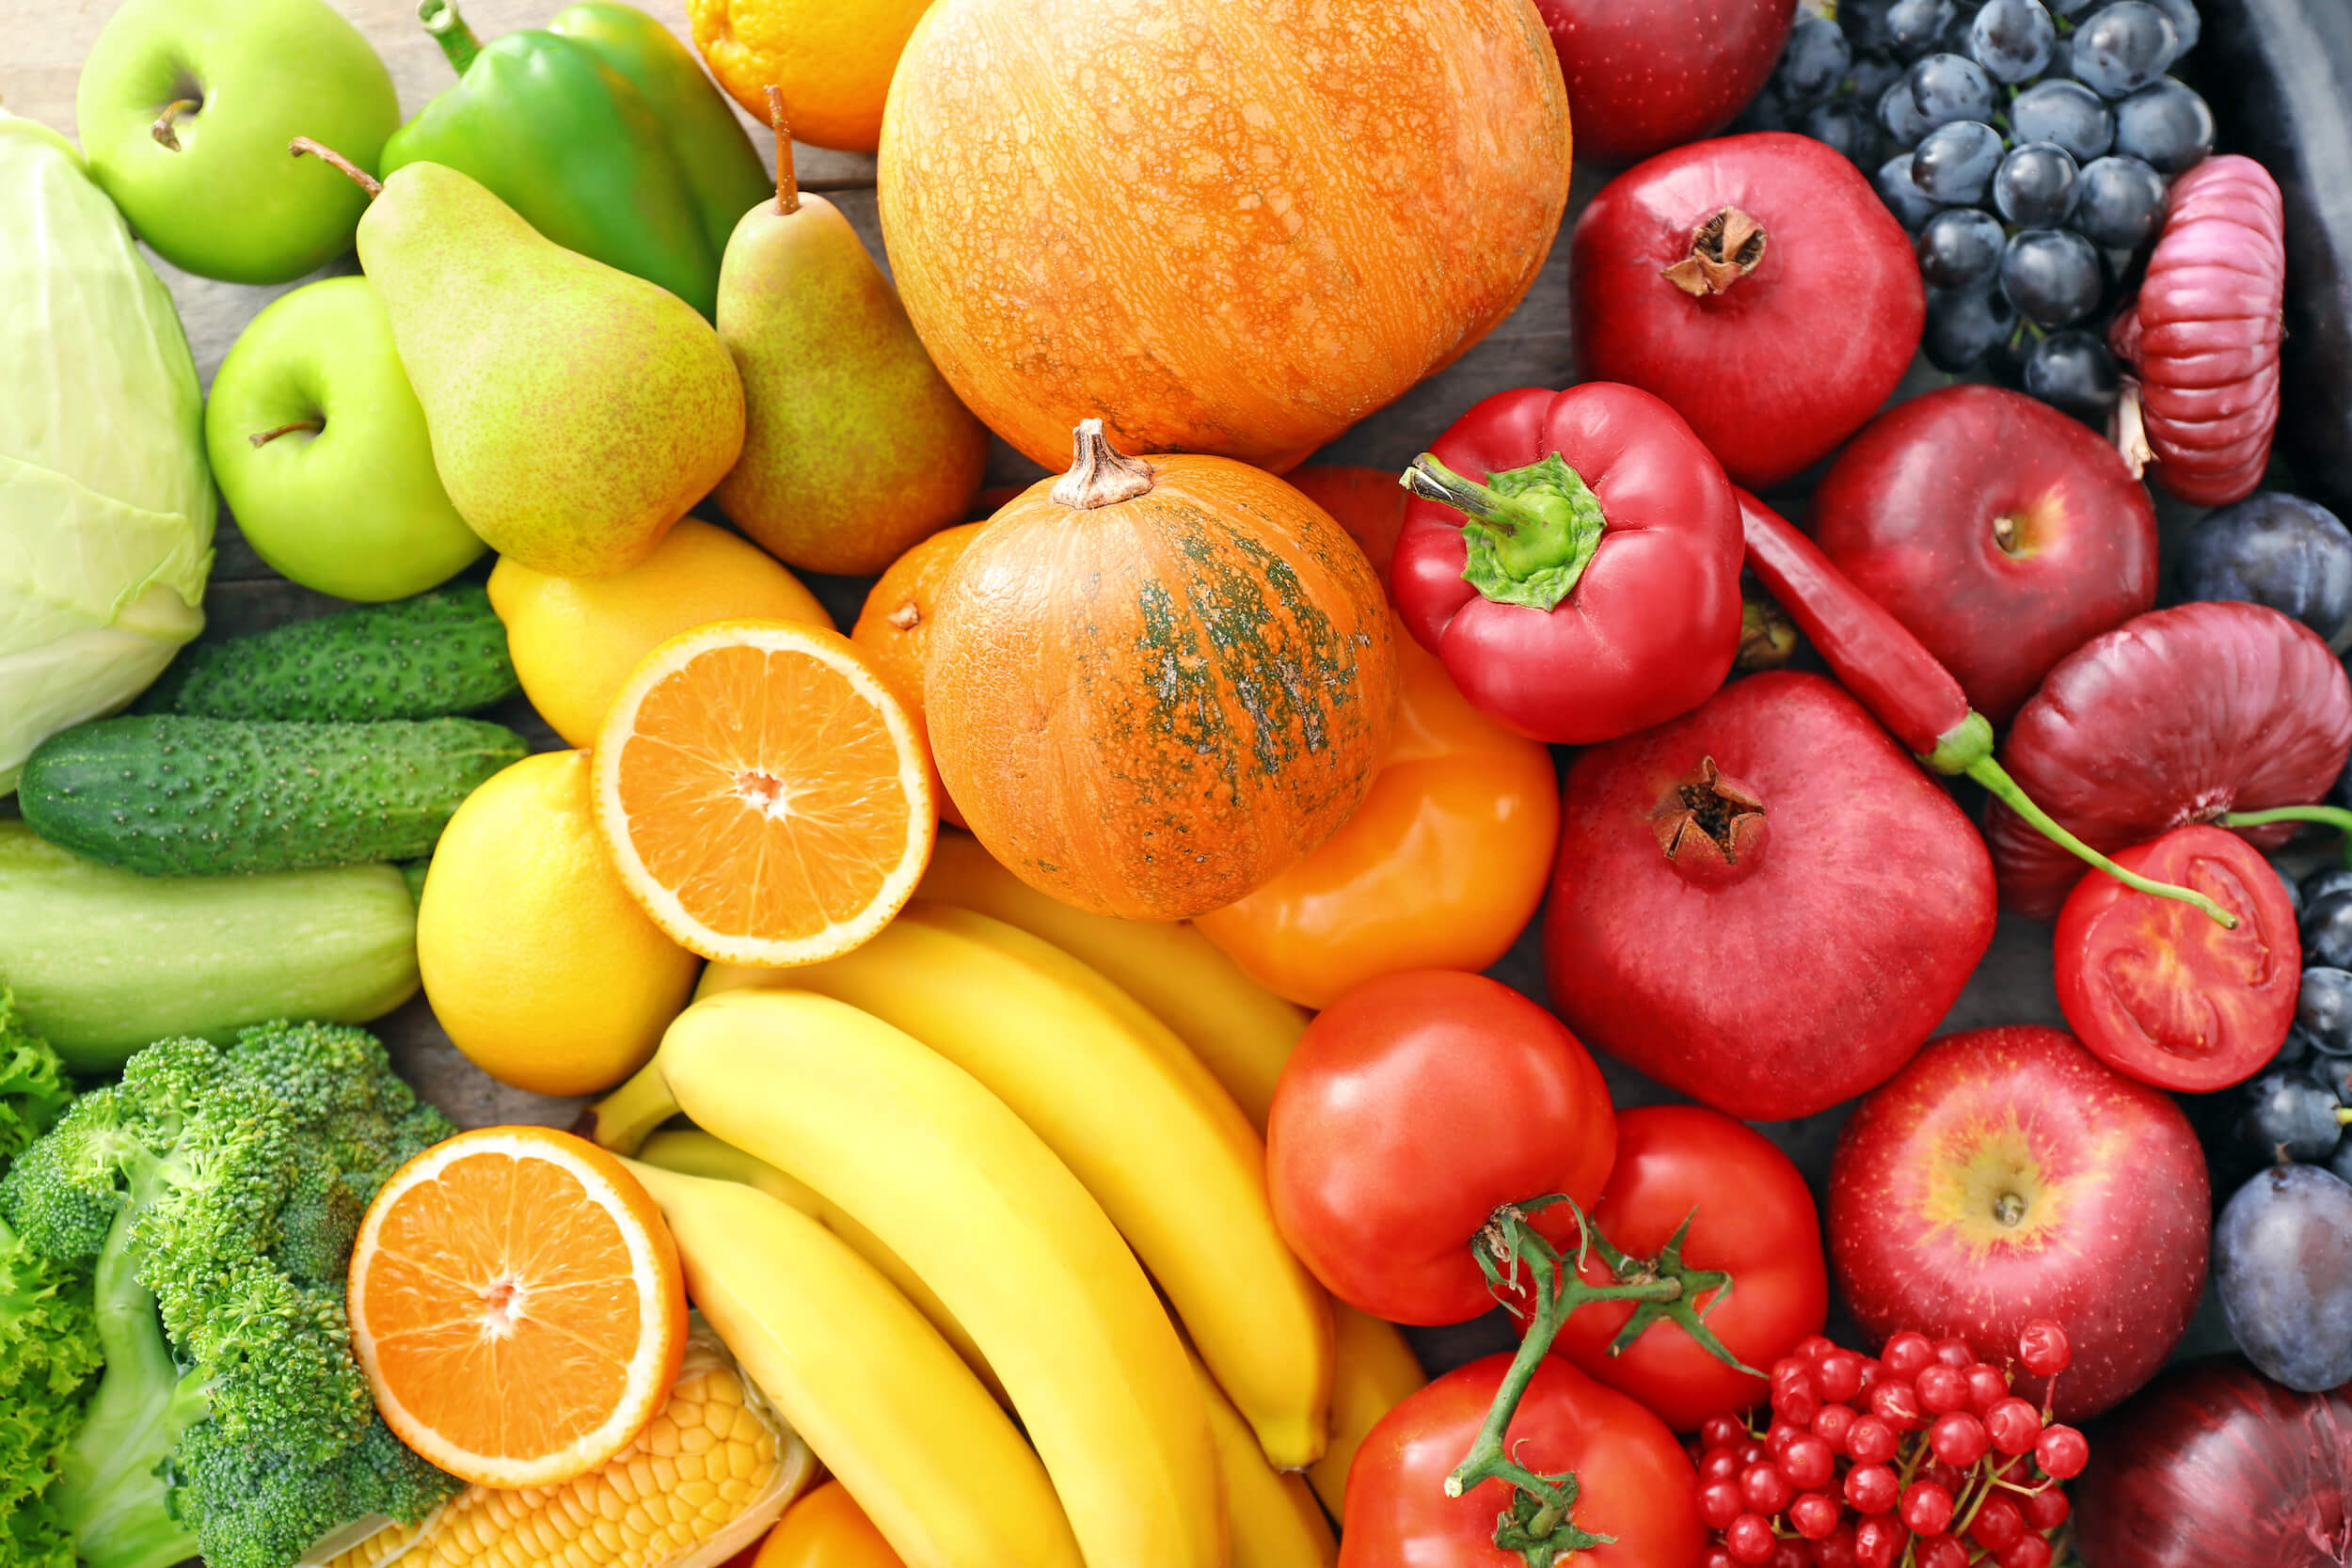 Colourful fruits and vegetables.